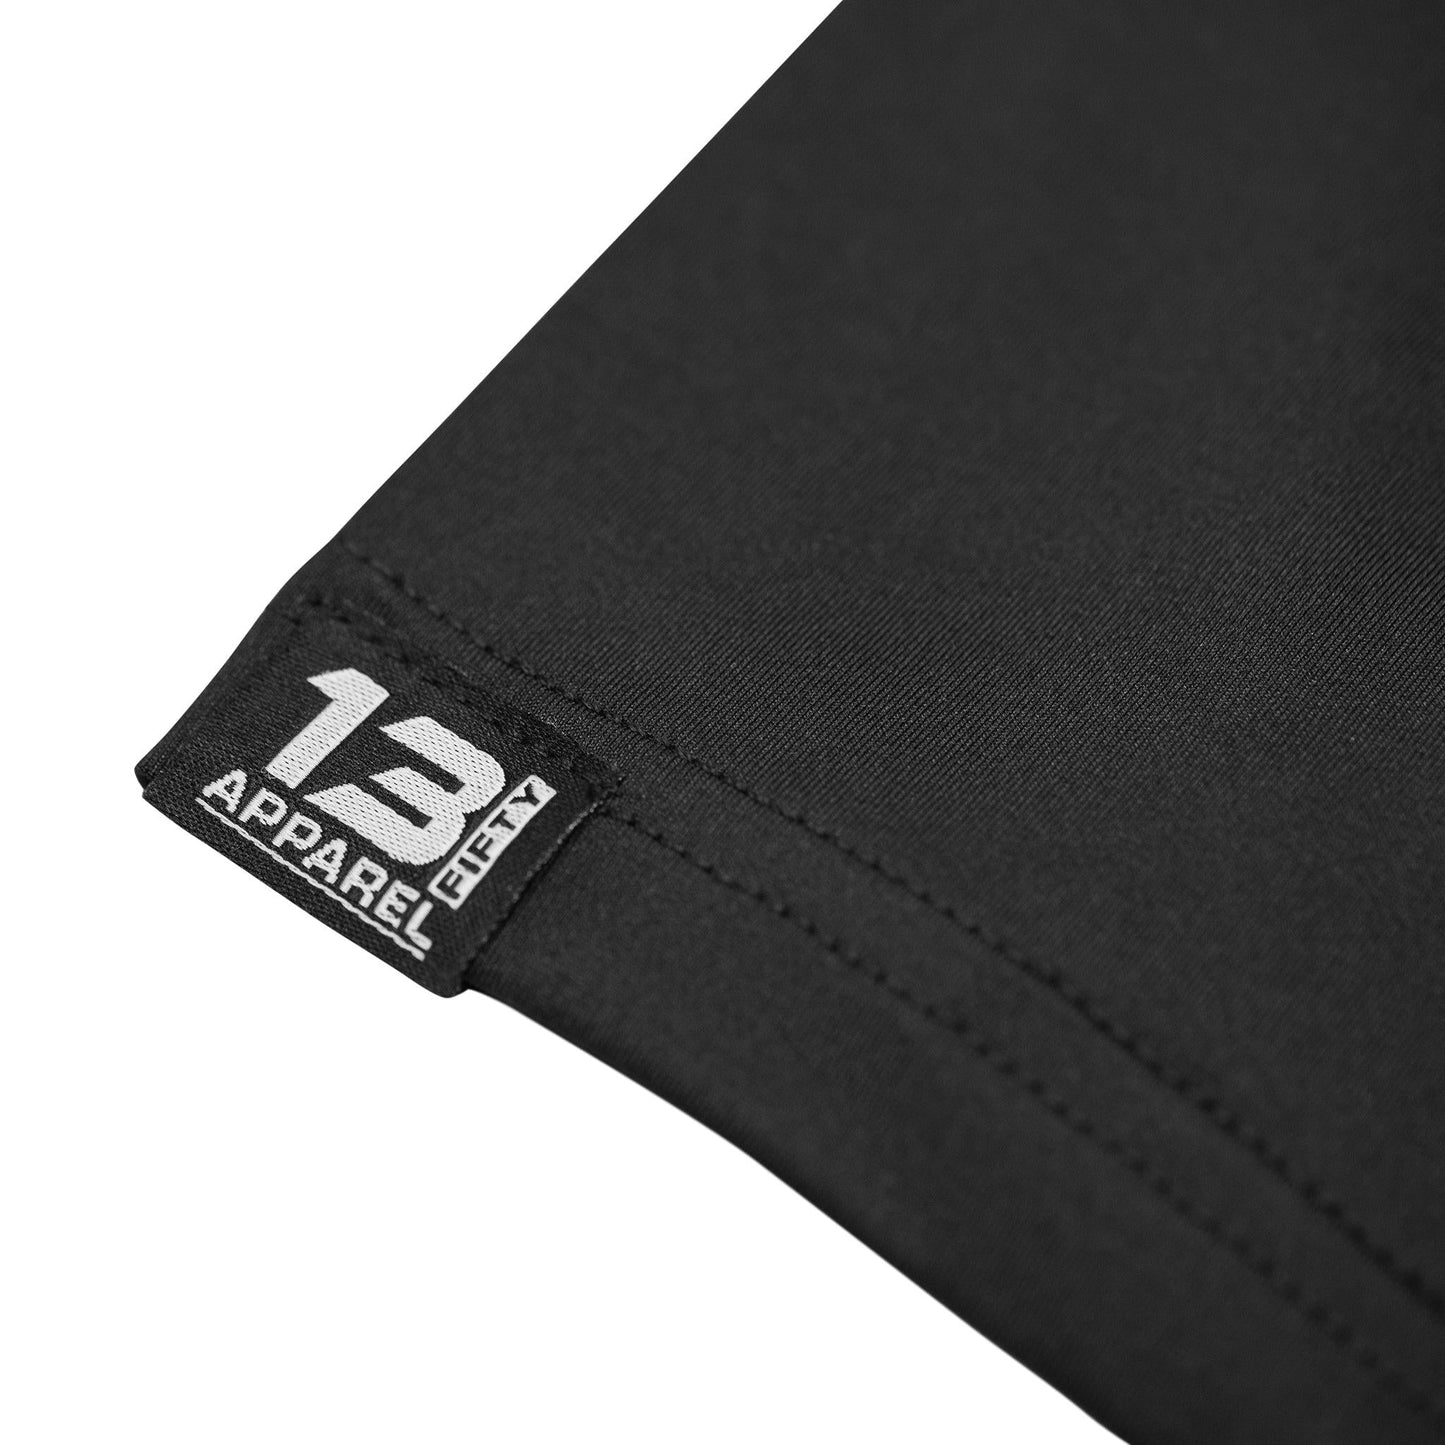 [INSTRUCTOR] Men's Performance Polo [BLK/RED]-13 Fifty Apparel